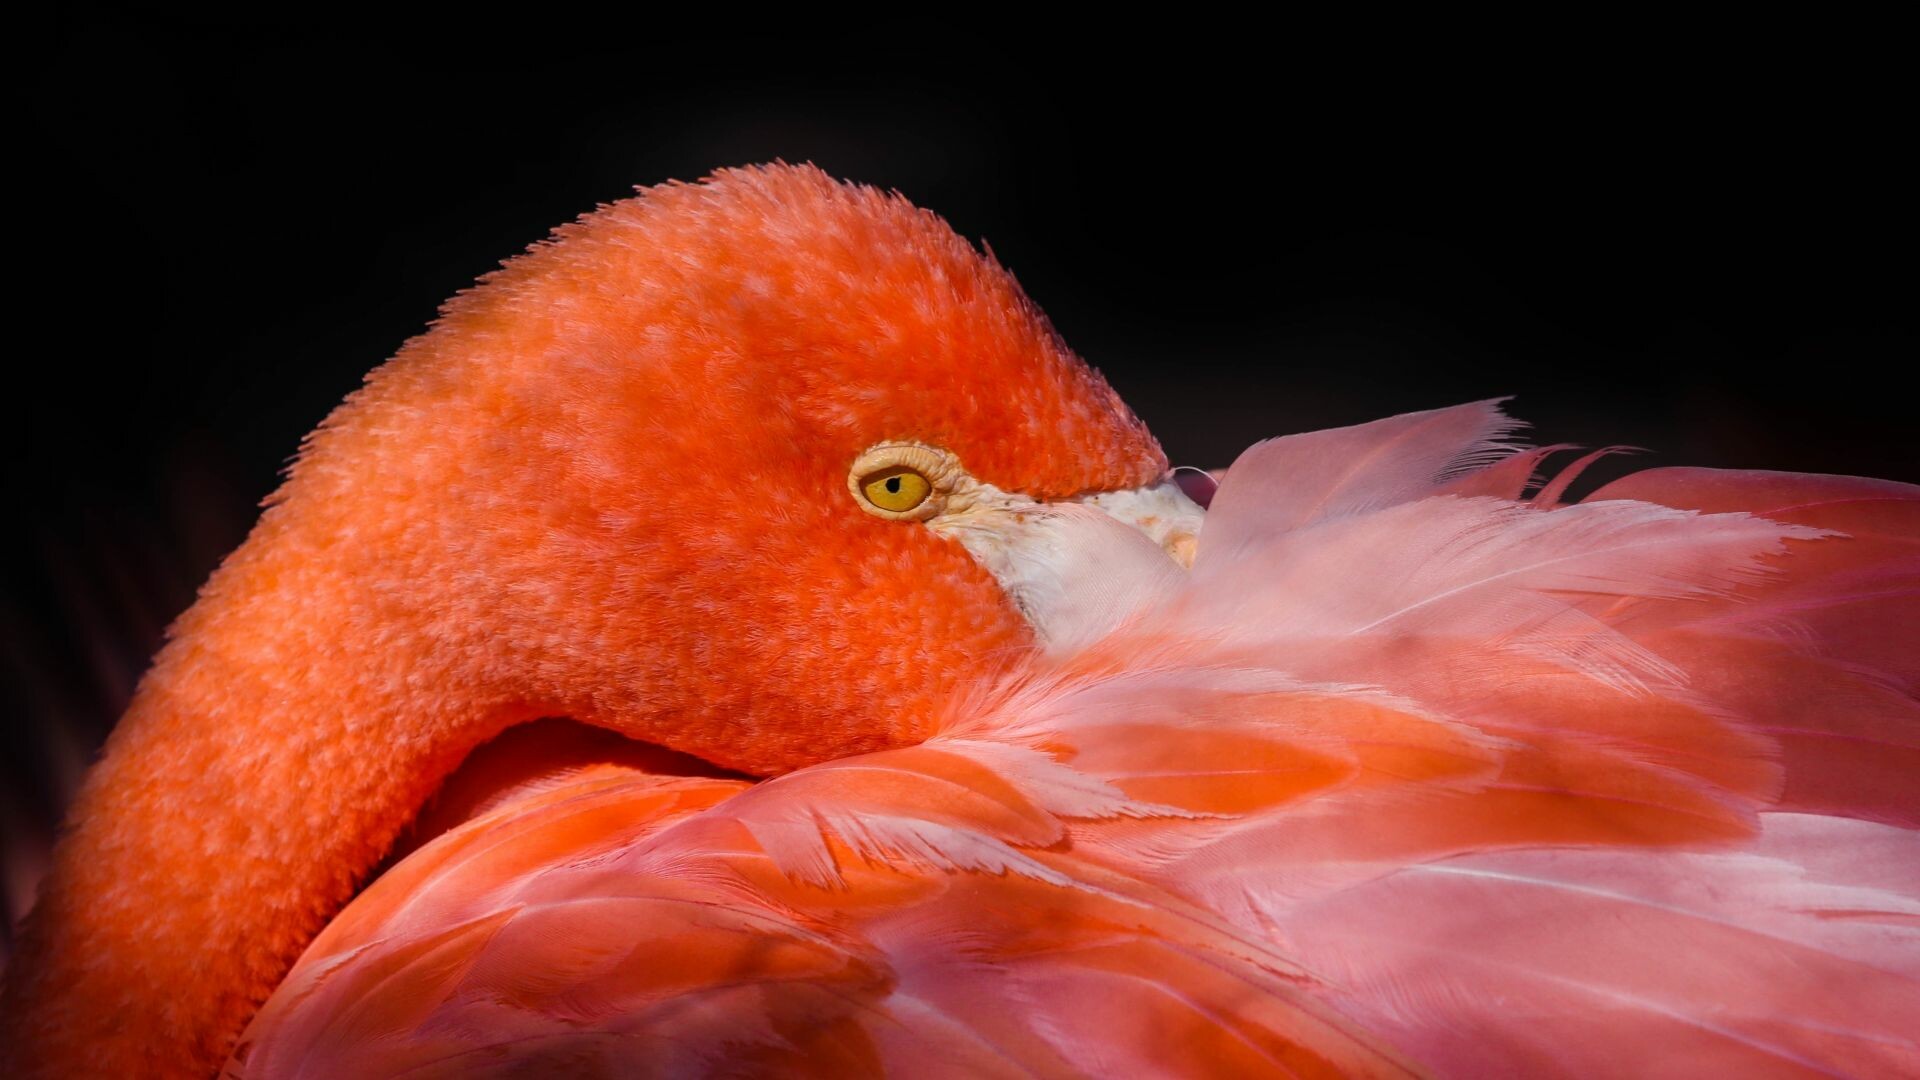 Flamingo: Phoenicopterus, Have vibrant pink feathers, long and slender legs. 1920x1080 Full HD Wallpaper.